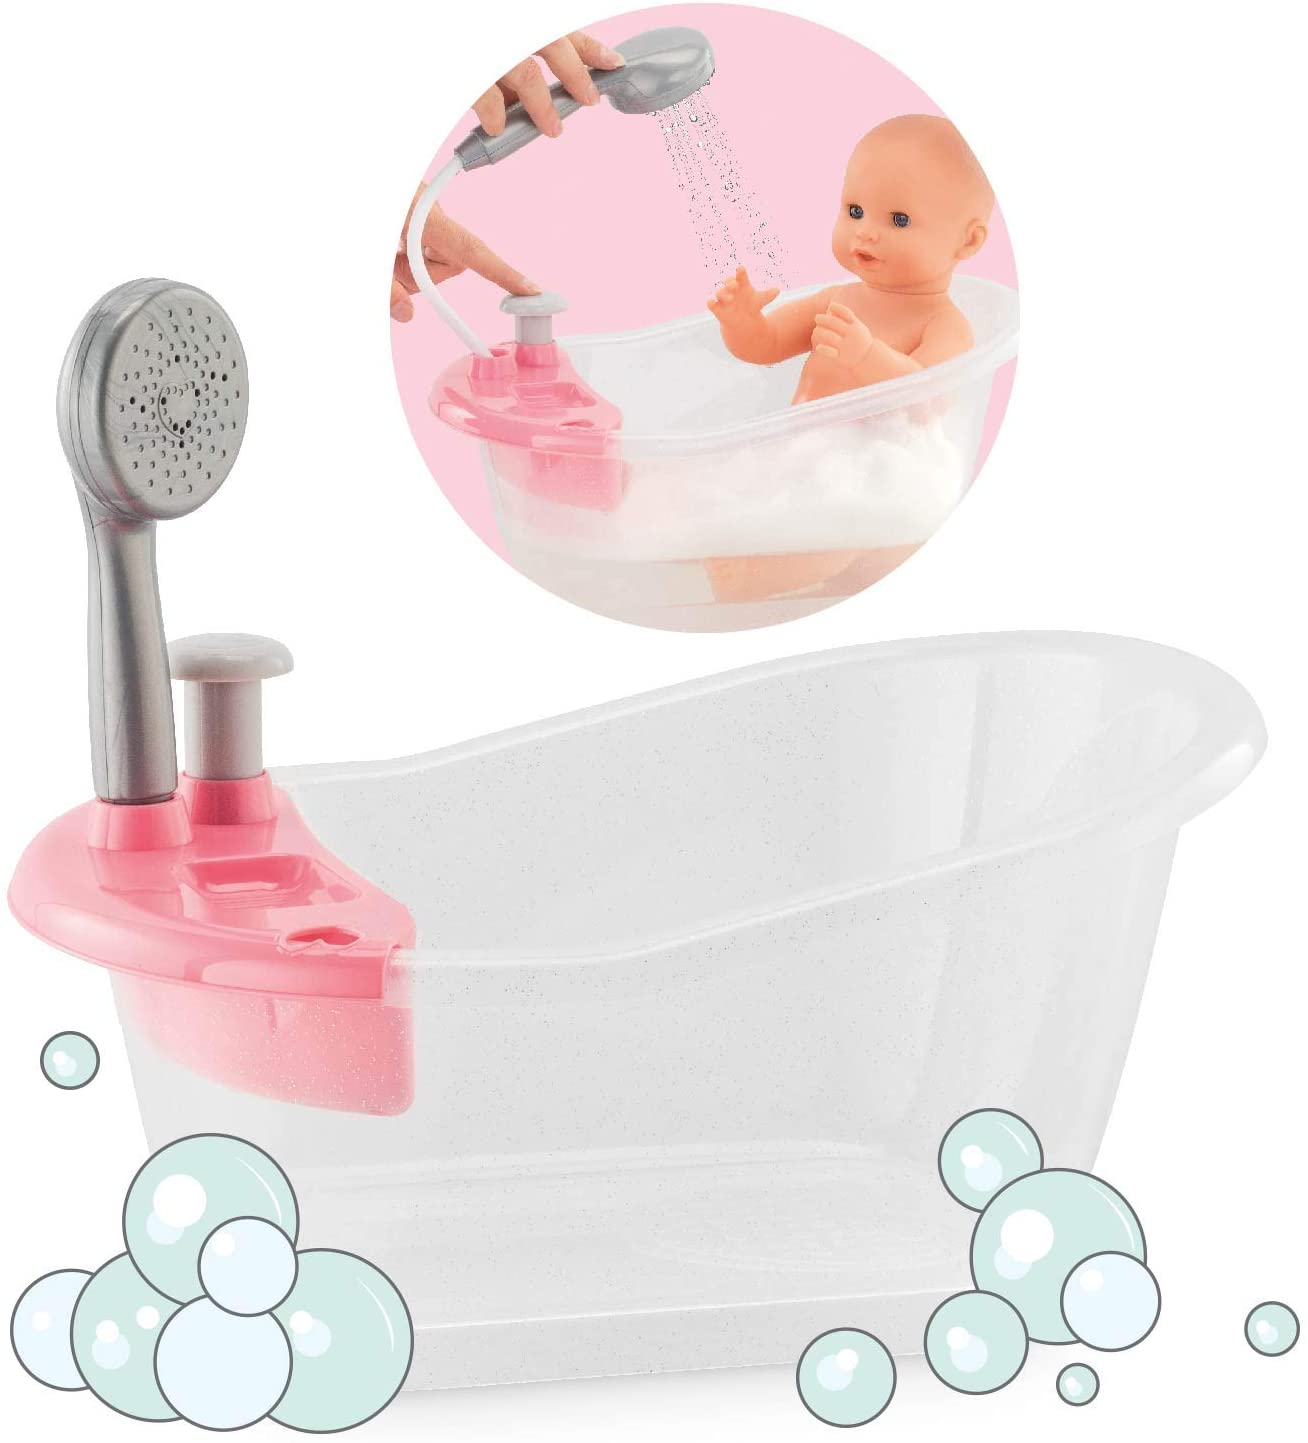 Bathtub with Shower - Bath Play Set for 12" & 14" Baby Dolls, Toys Corolle   